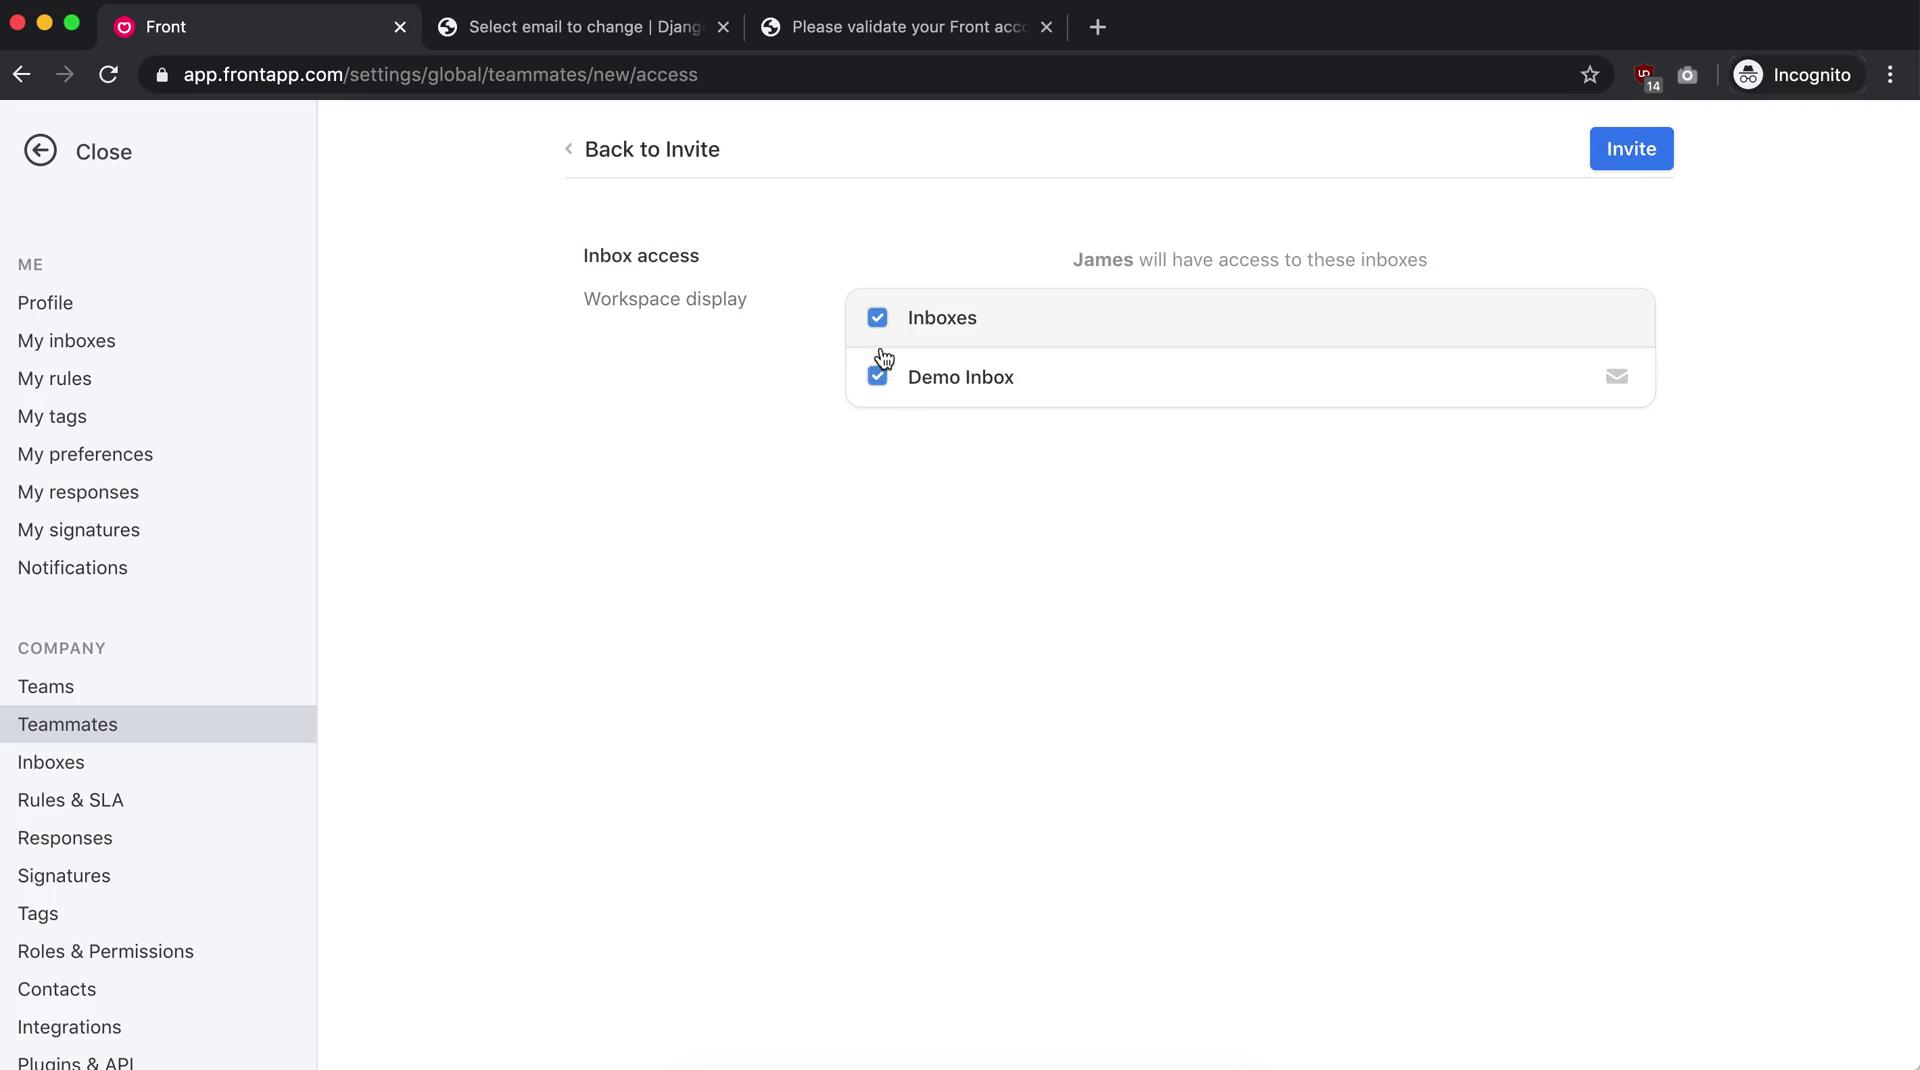 Screenshot of Set inbox access on Inviting people on Front user flow